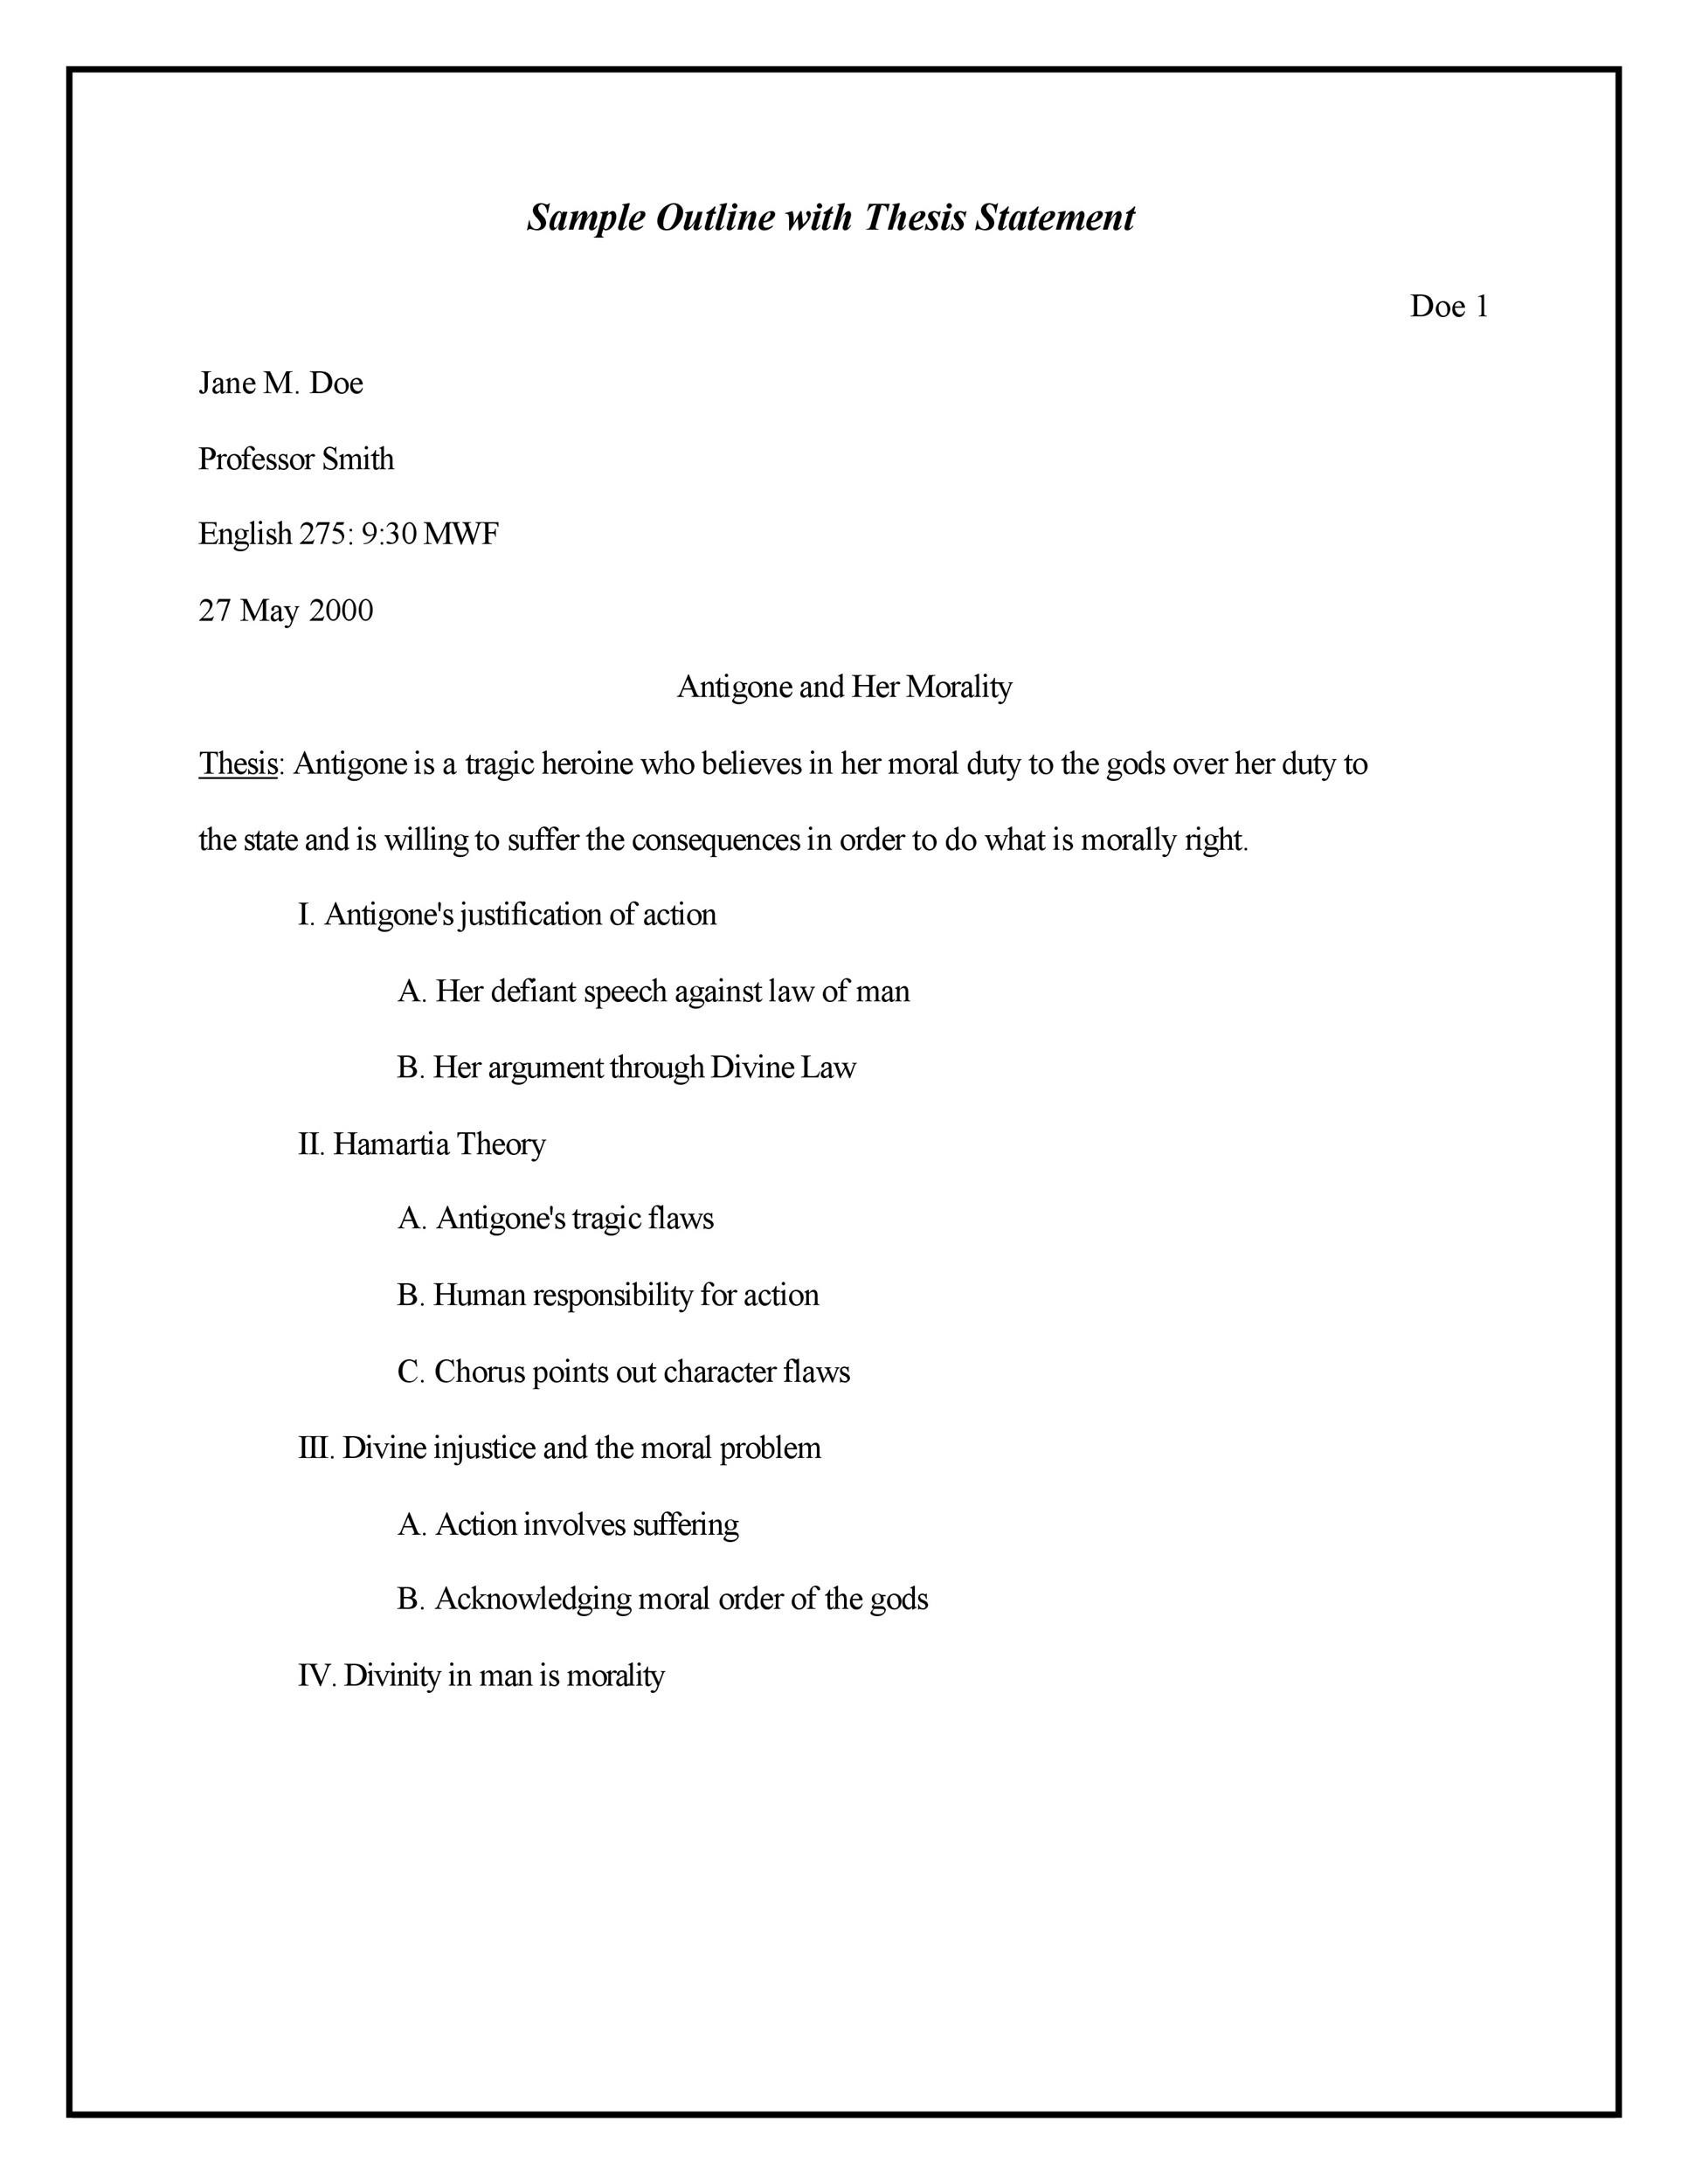 Free thesis statement template 22